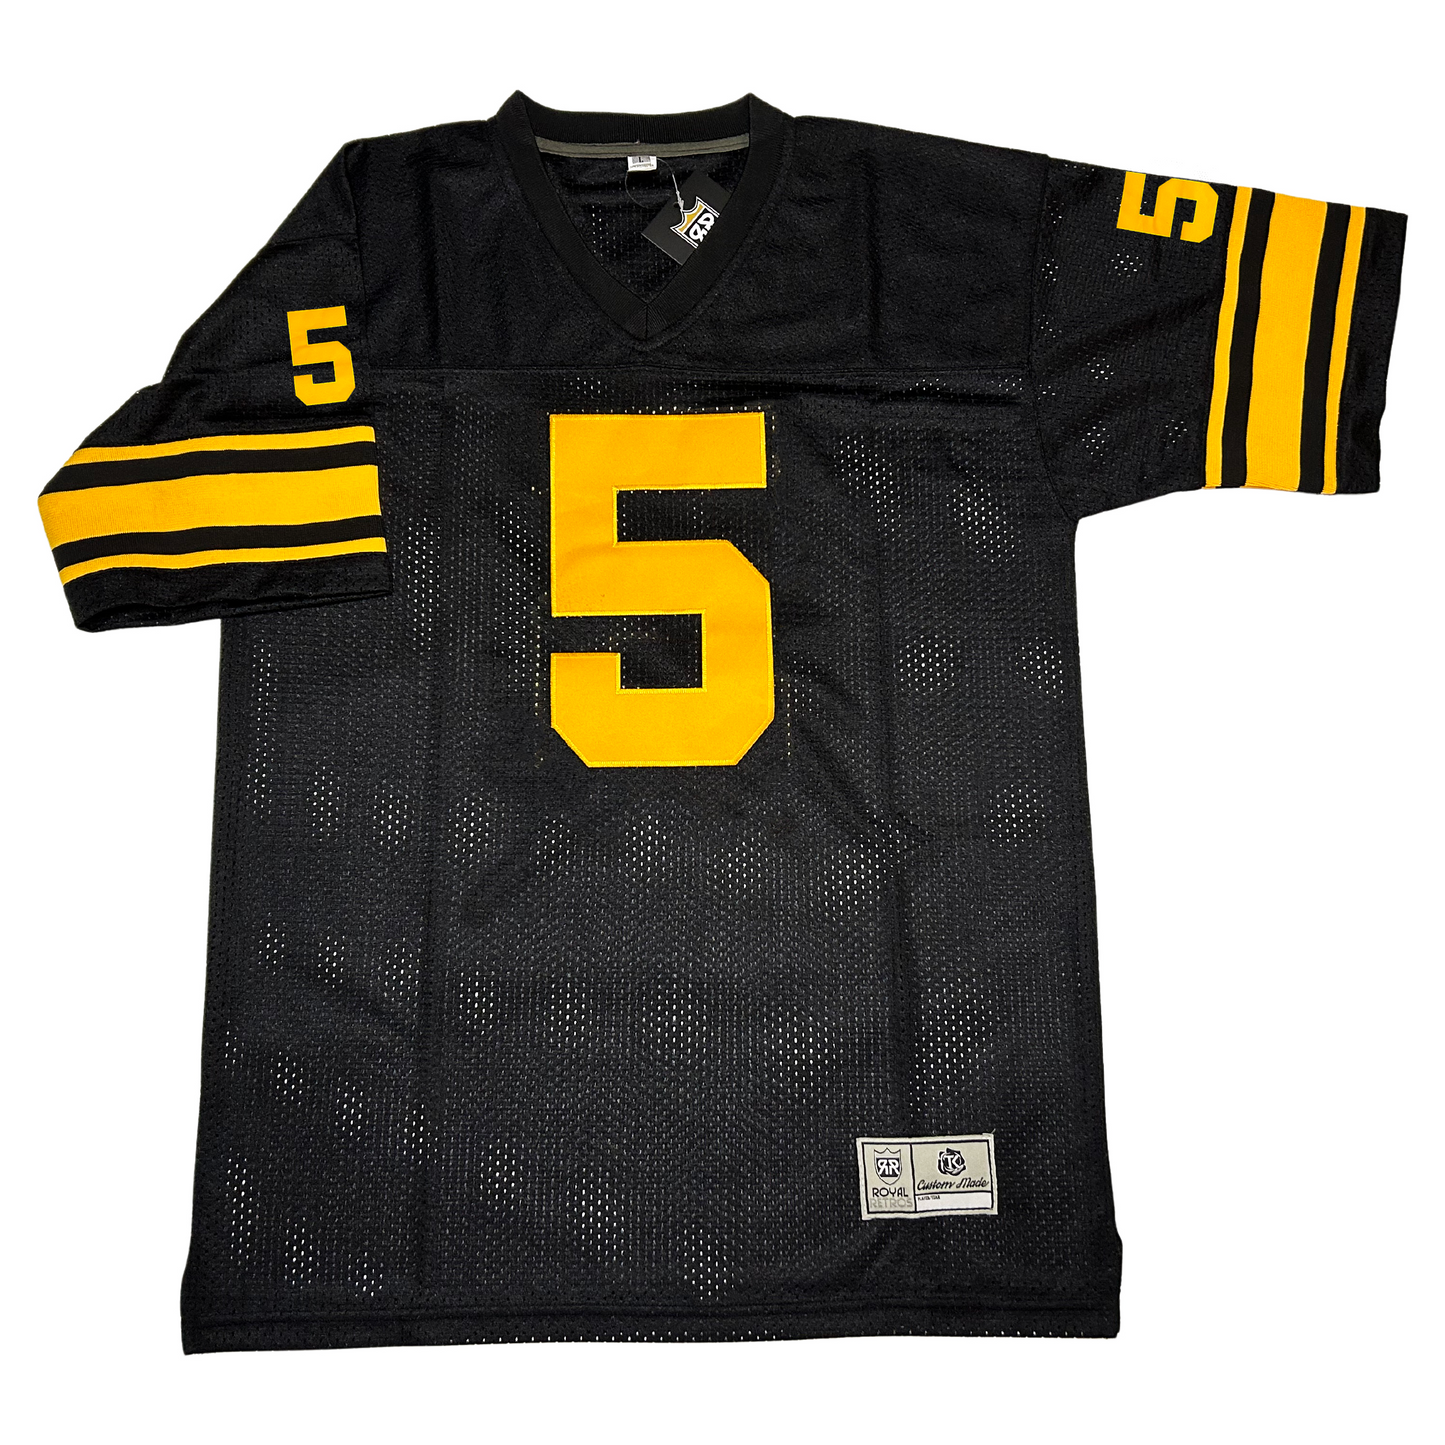 1965 pittsburgh steelers jersey